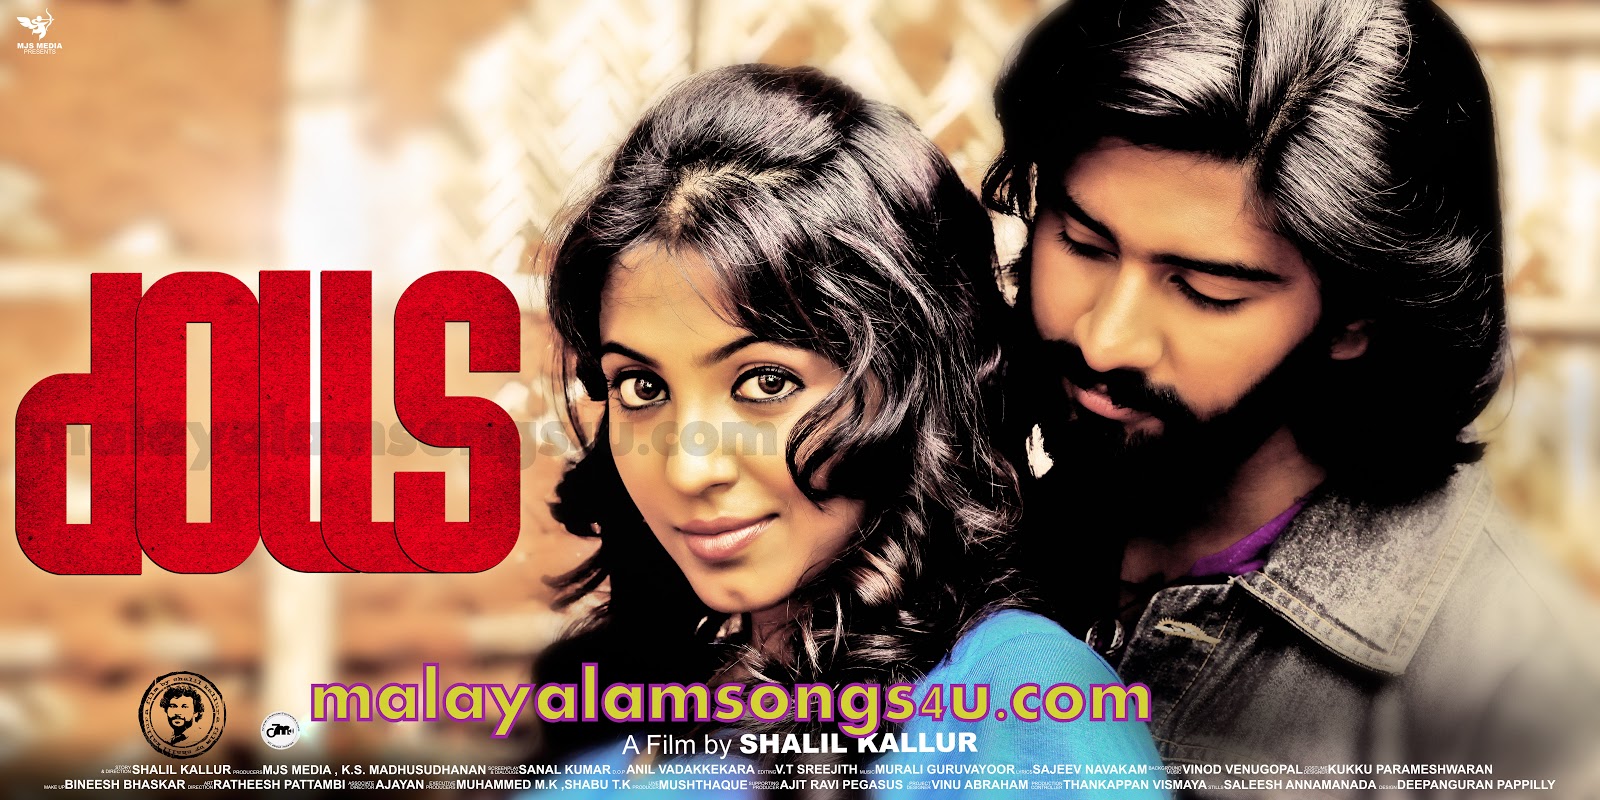 old malayalam movie download sites